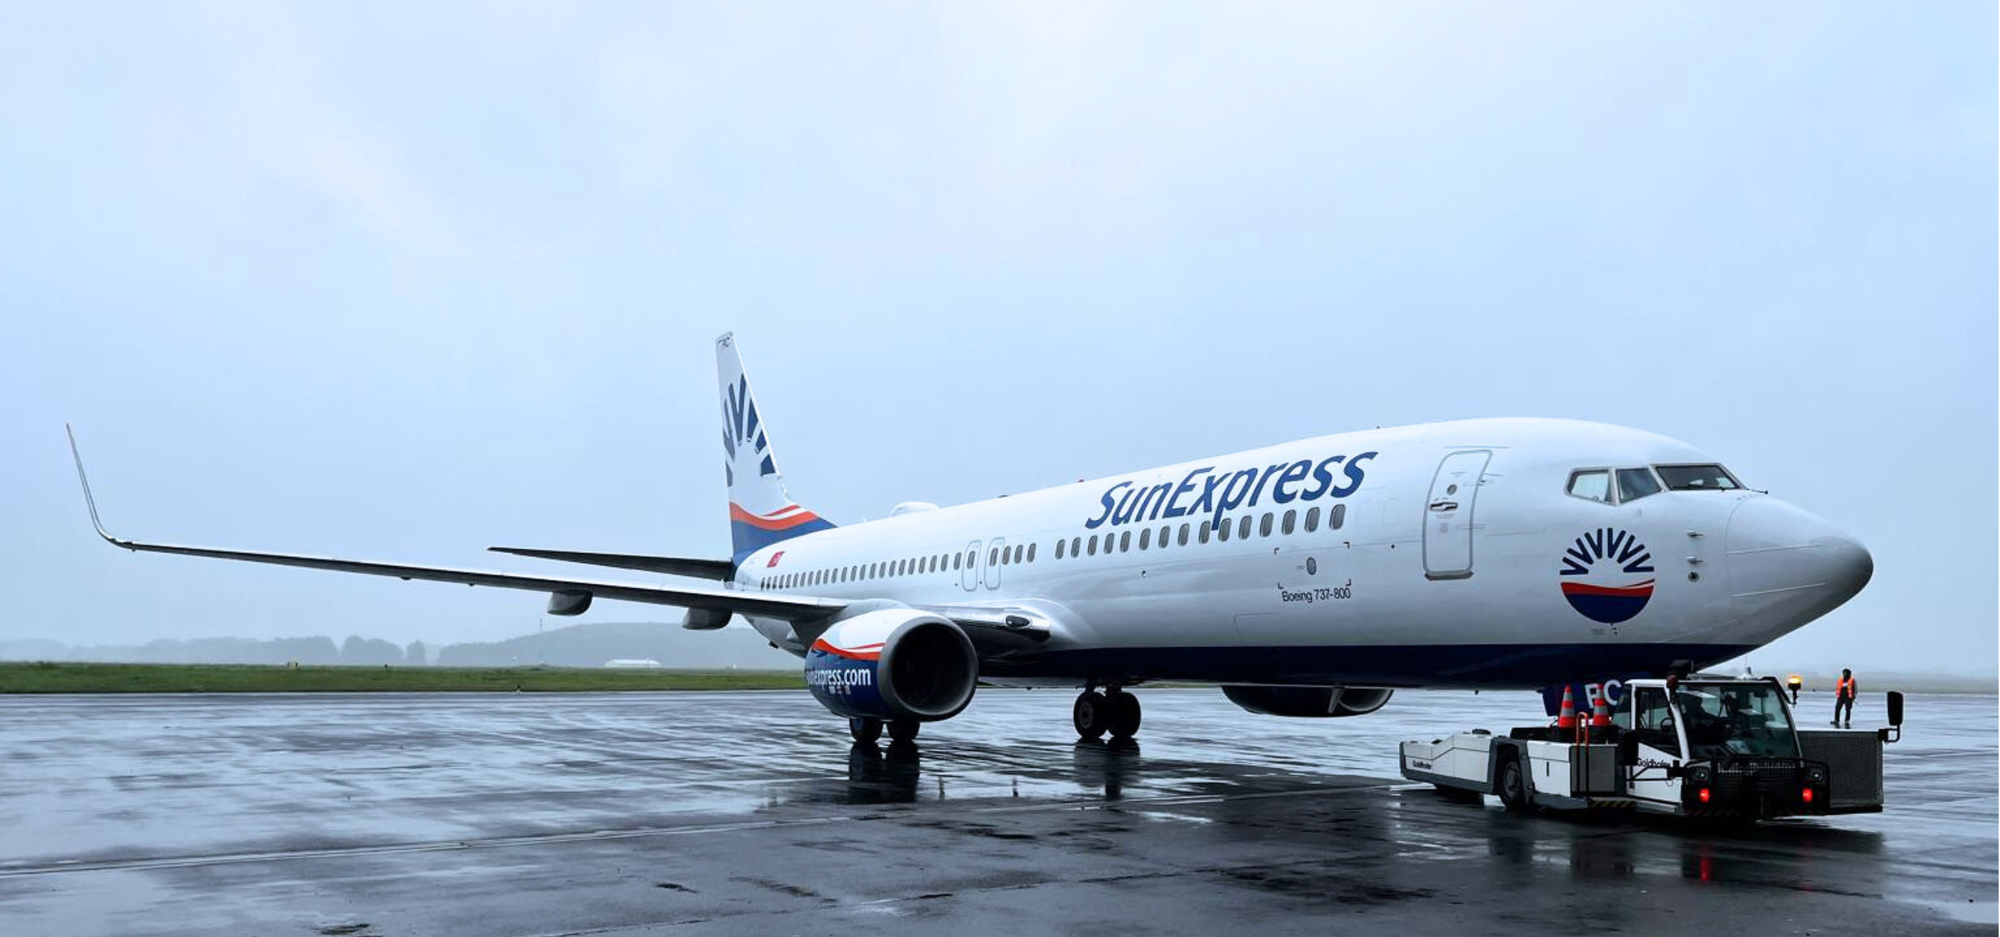 Stratos delivers 737-800 to SunExpress